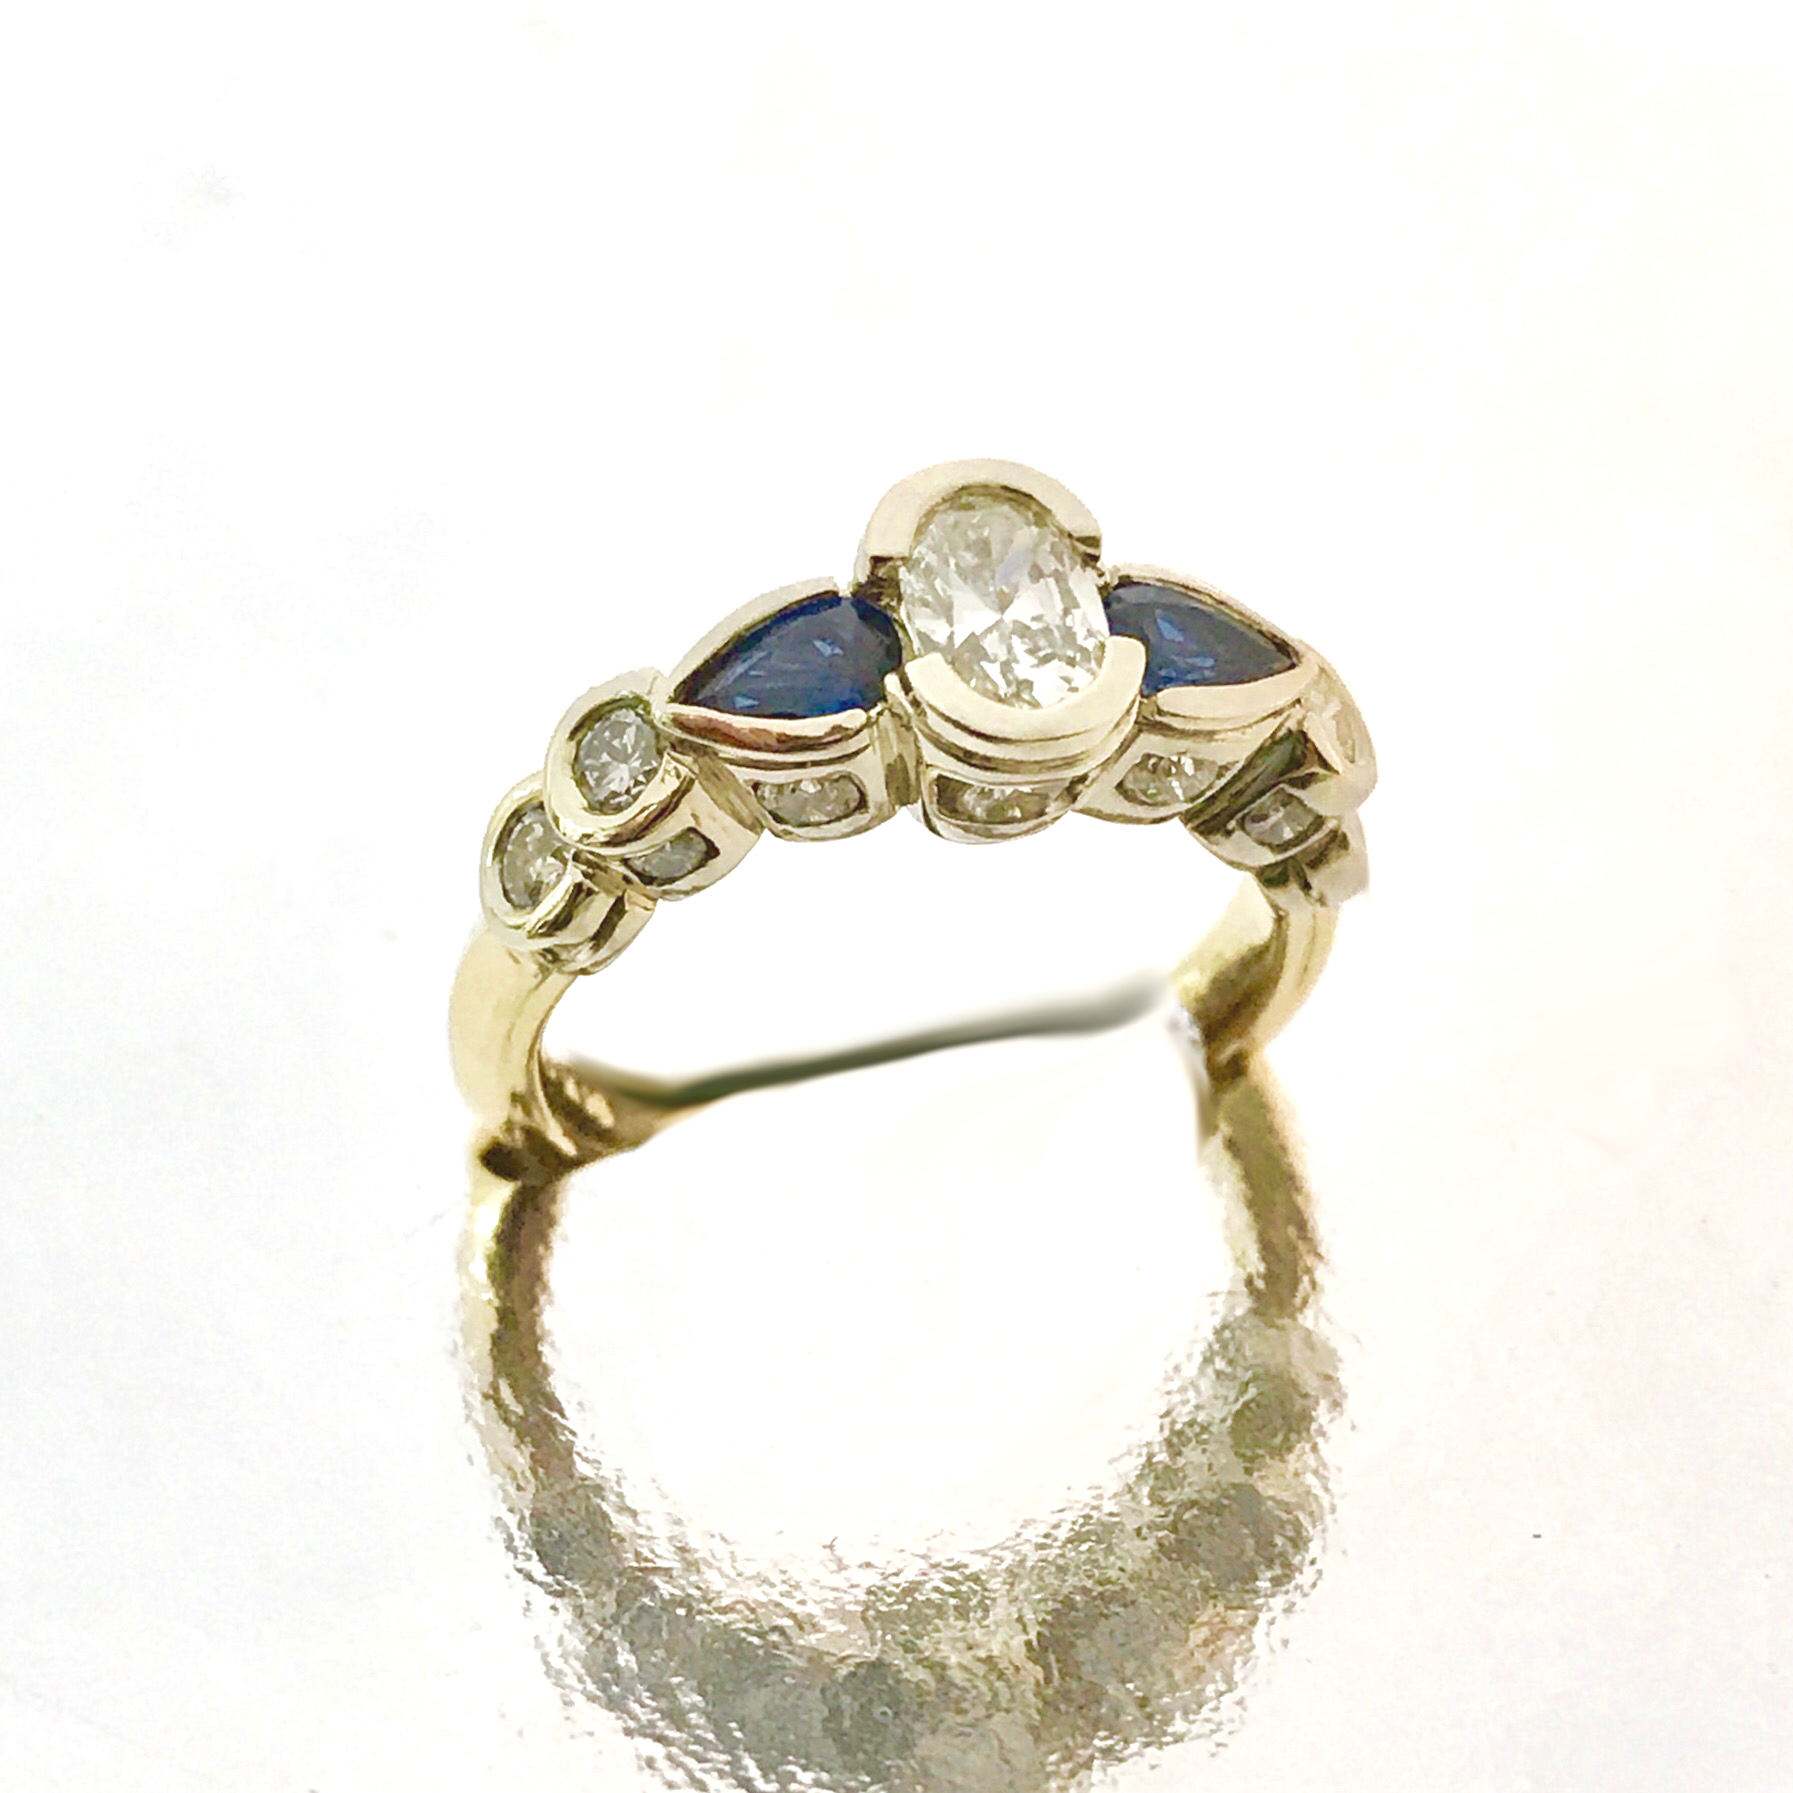 Custom 14 Kt Two Tone Sapphire and Diamond Ring With Diamonds On All Faces Of The Ring